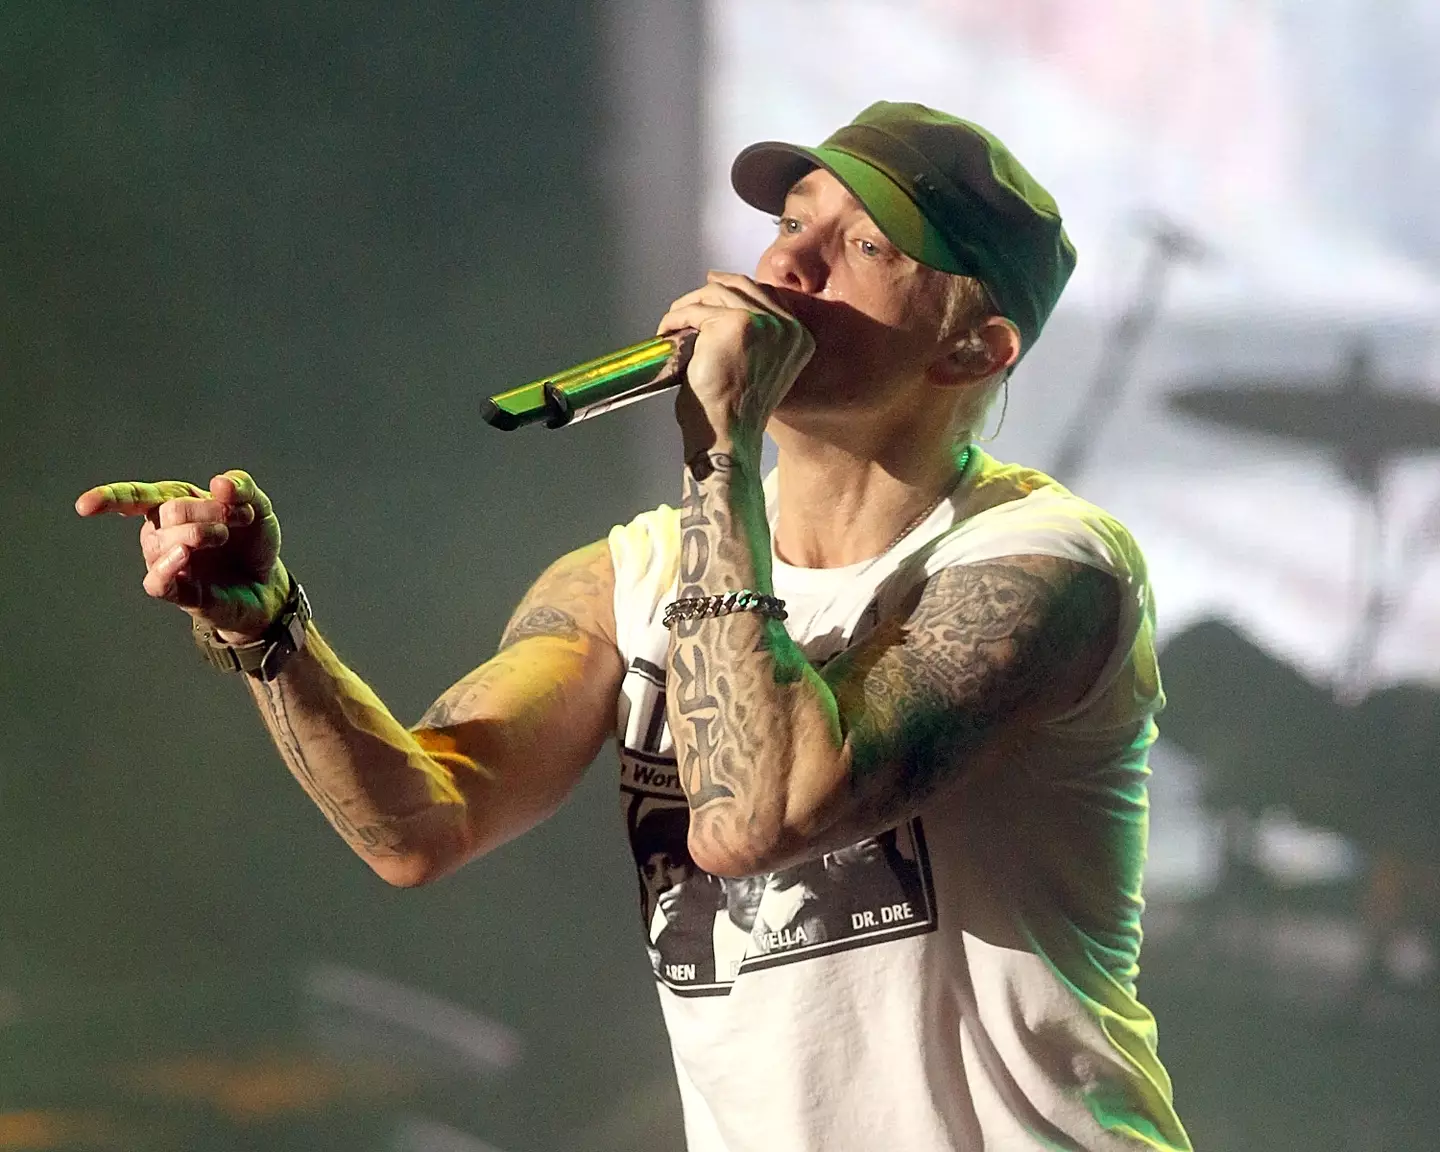 Eminem no longer performs the controversial track.